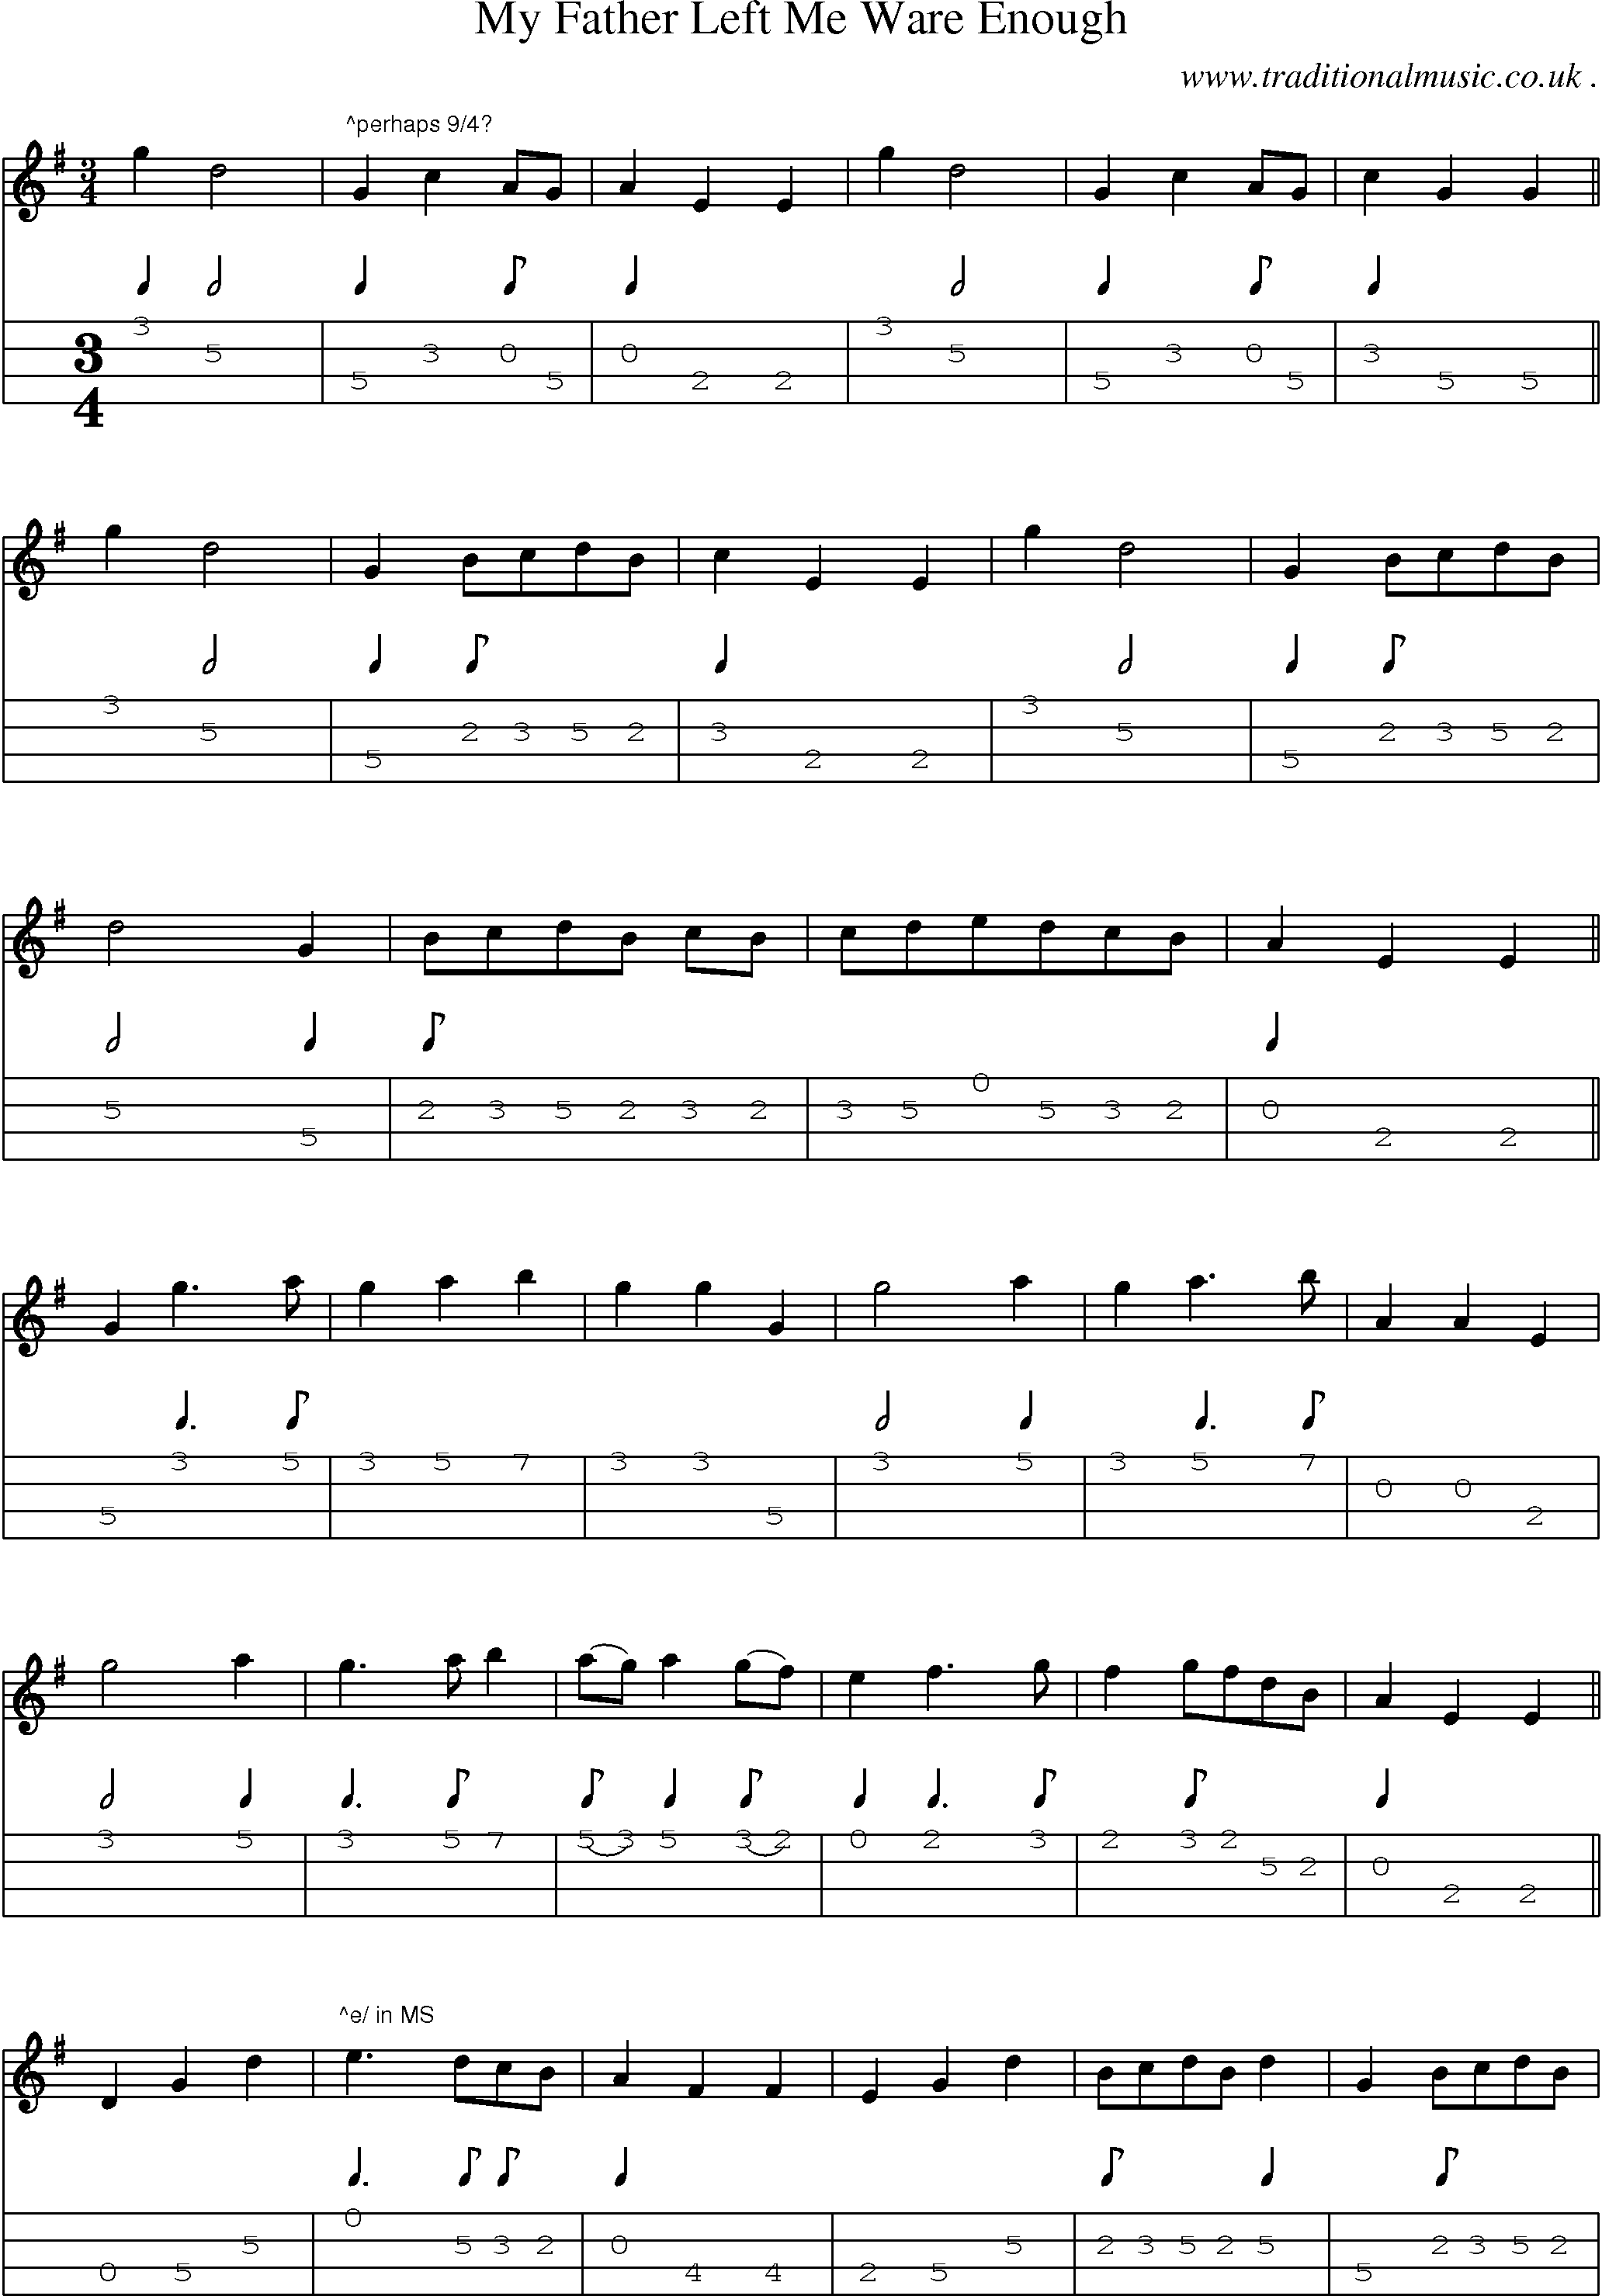 Sheet-Music and Mandolin Tabs for My Father Left Me Ware Enough